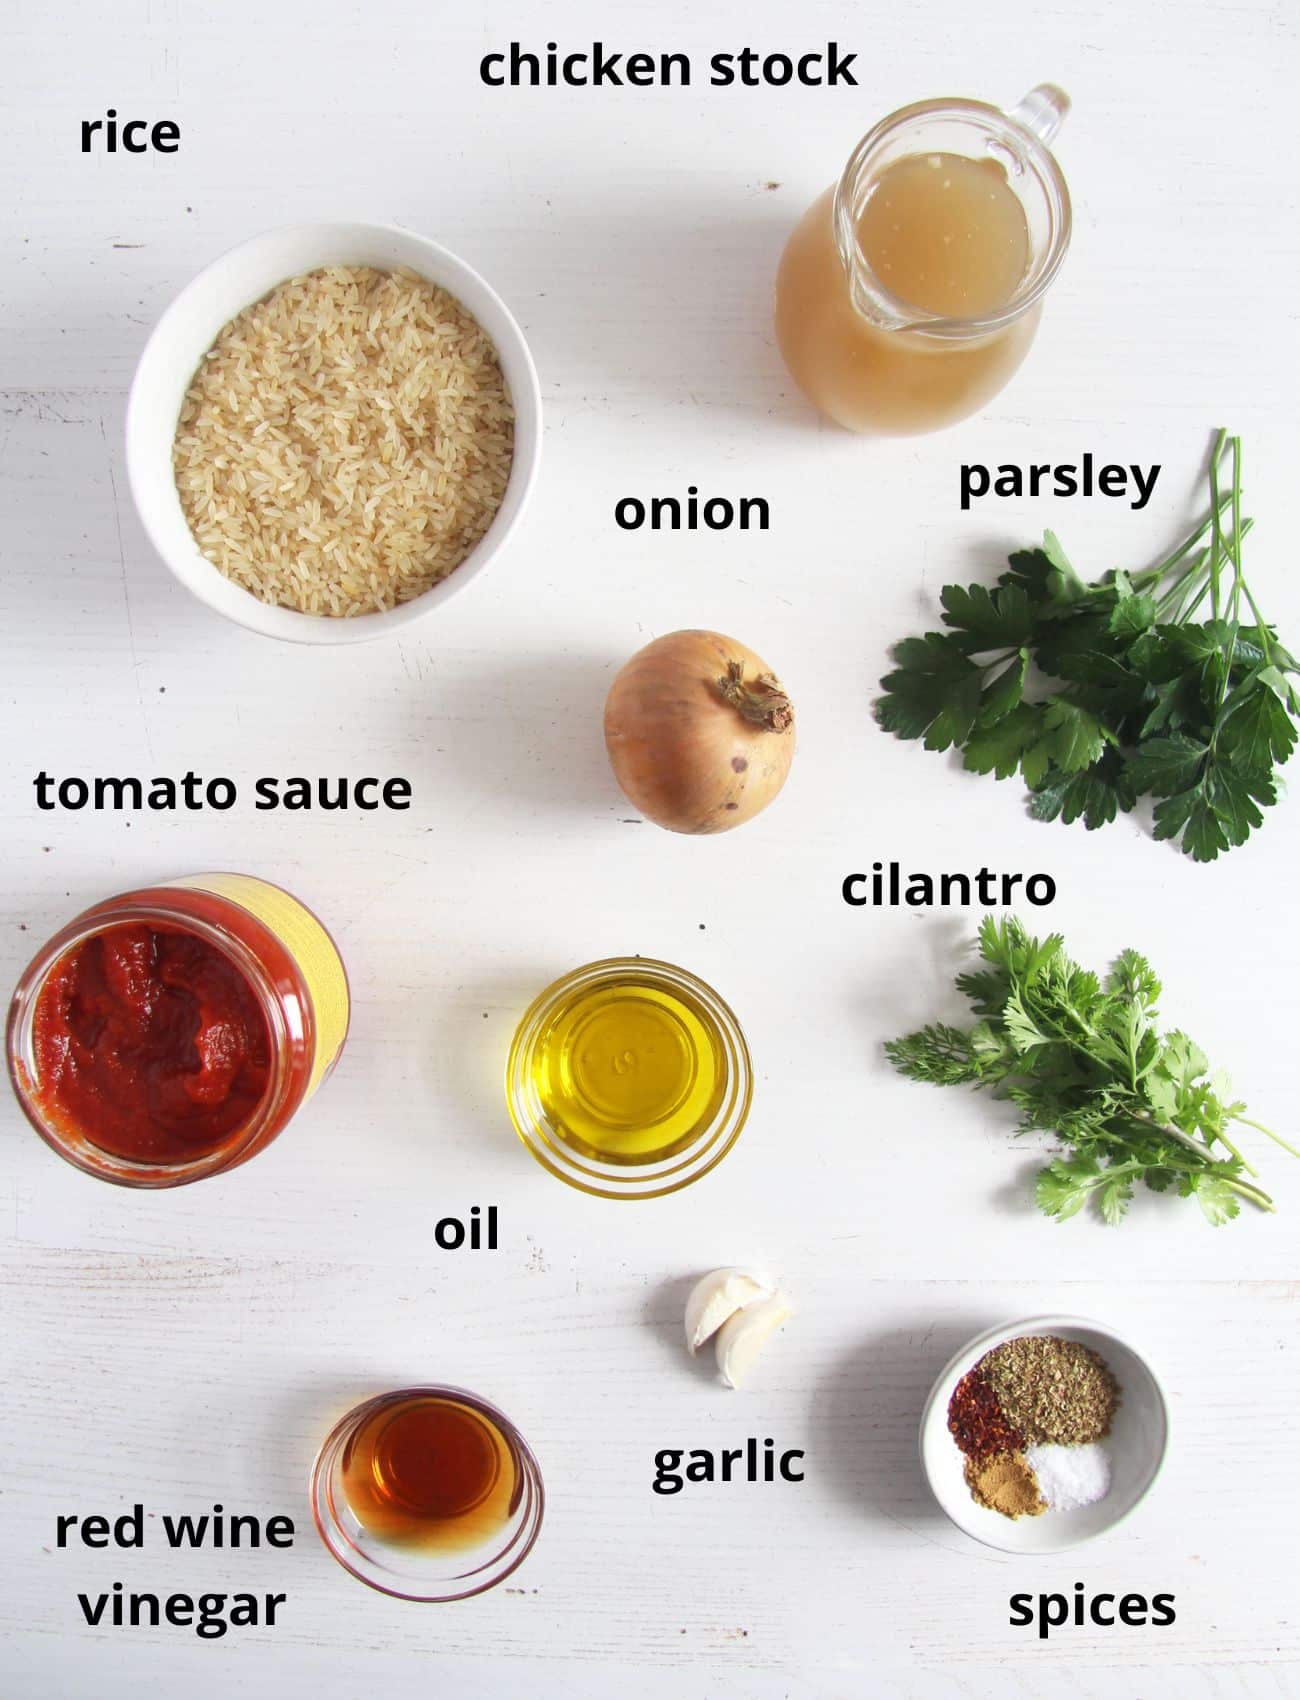 listed ingredients for cooking rice with tomato sauce and chimichurri.